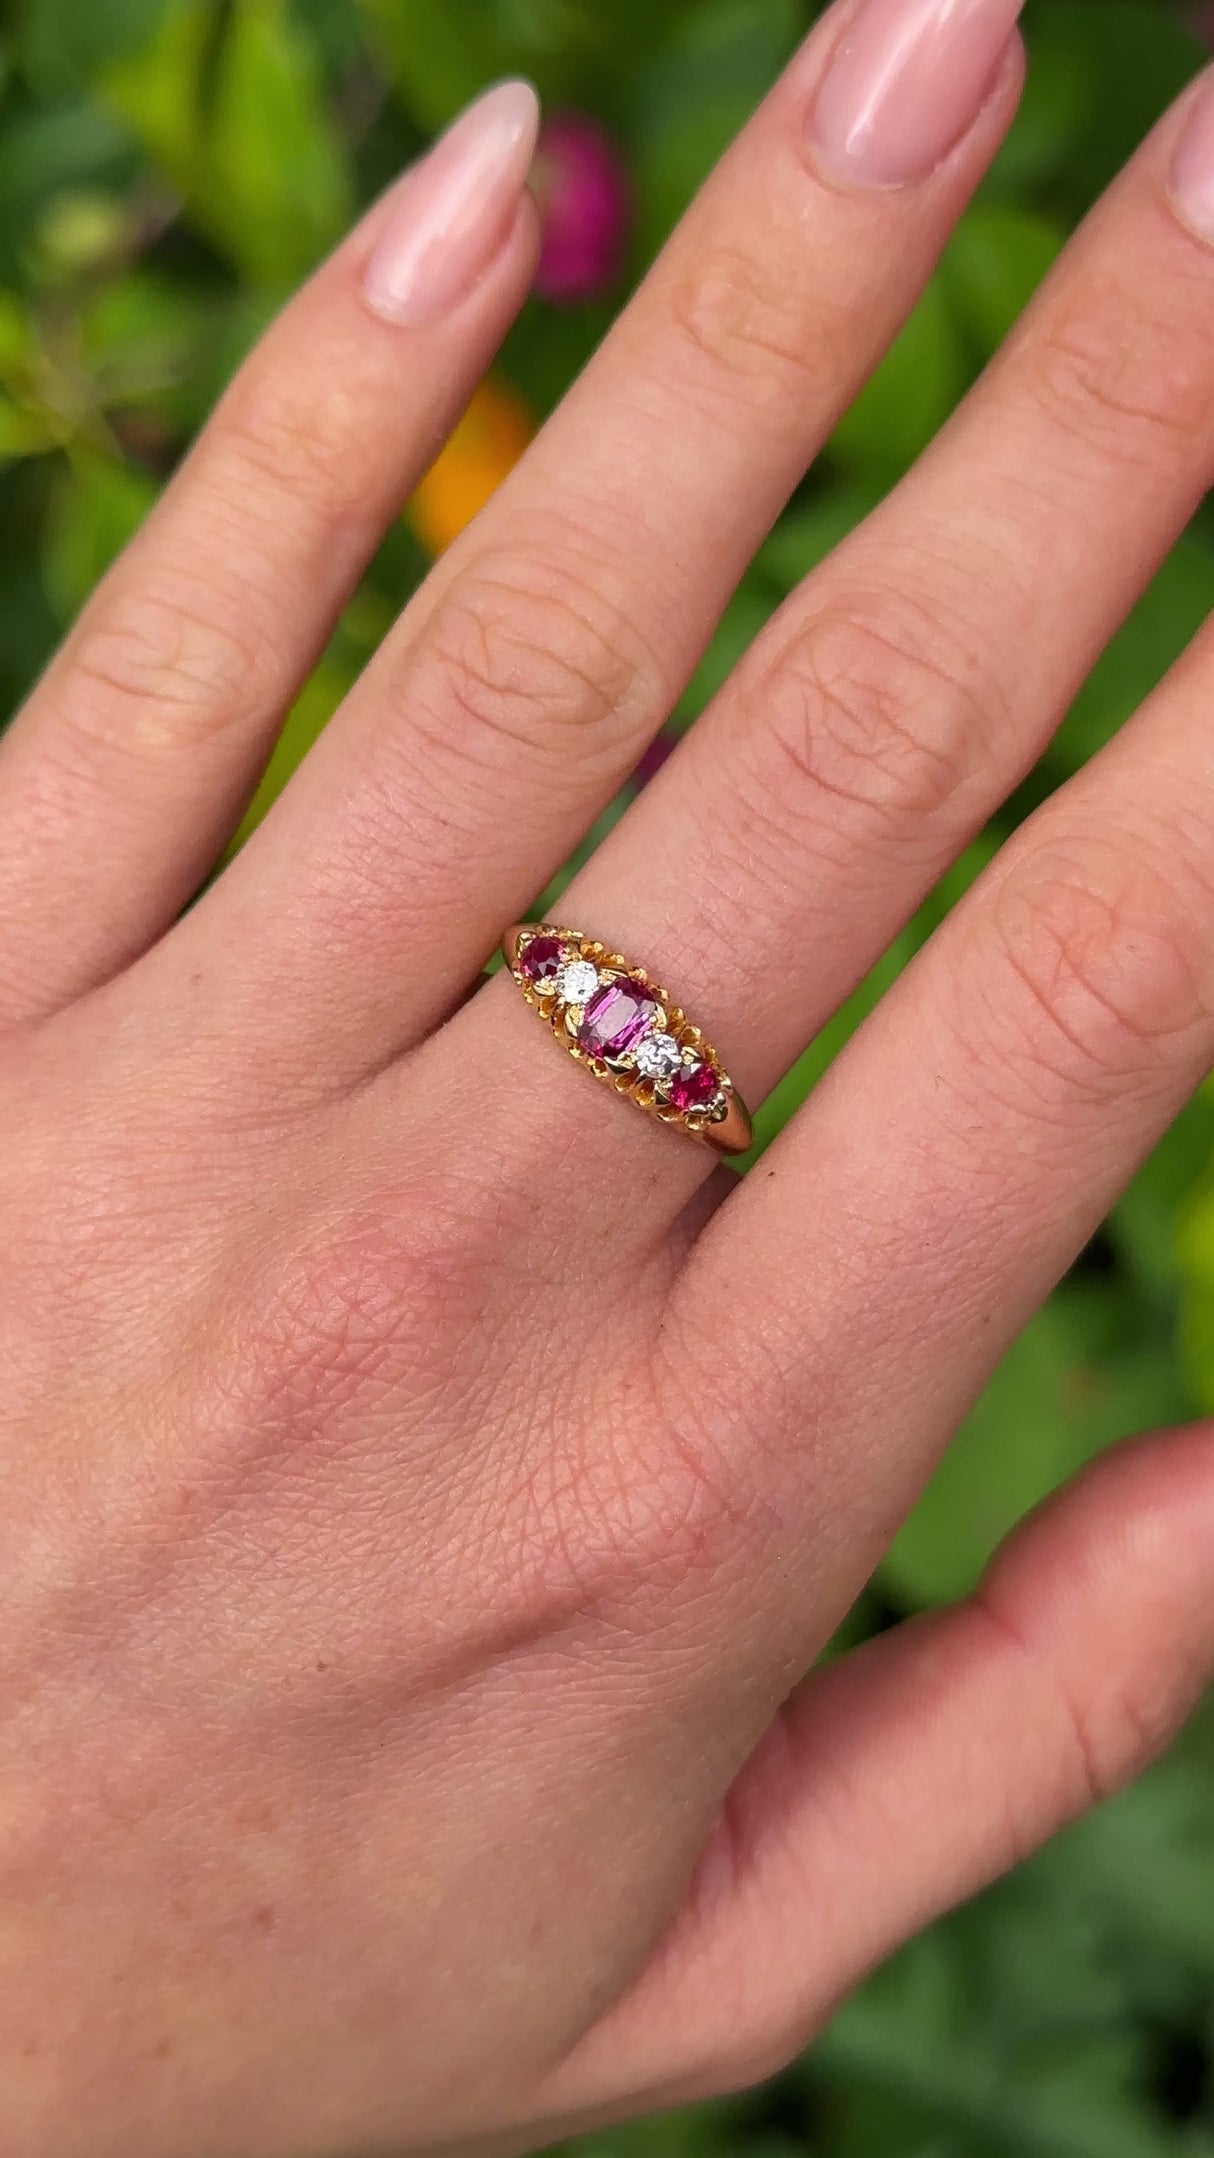 Antique, Edwardian Five Stone Ruby and Diamond Ring, 18ct Yellow Gold worn on hand.